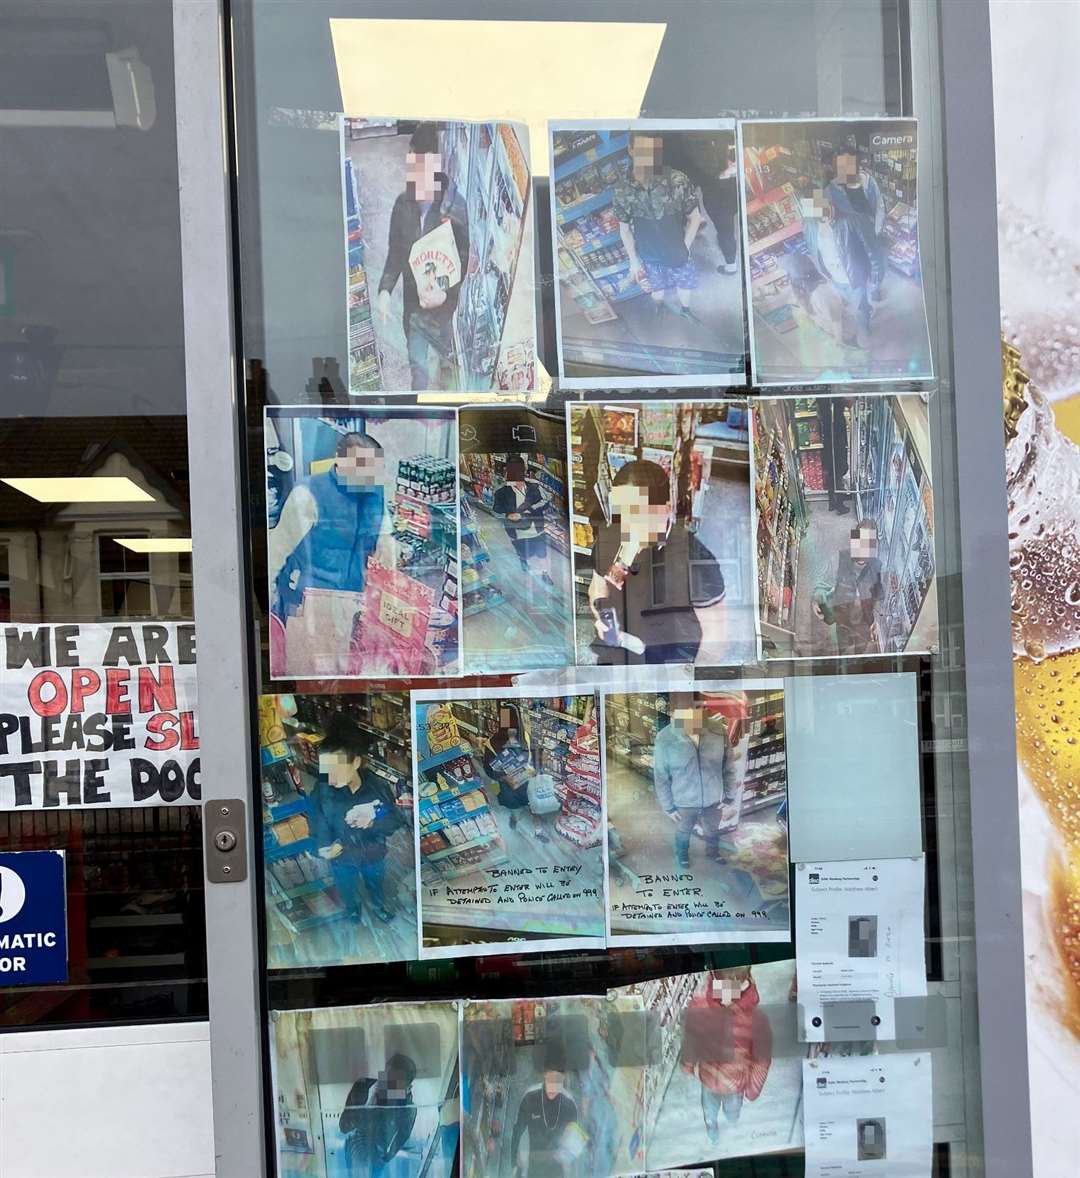 Images in the window of One Stop in Watling Street, Chatham show those banned from the shop for suspected shoplifting